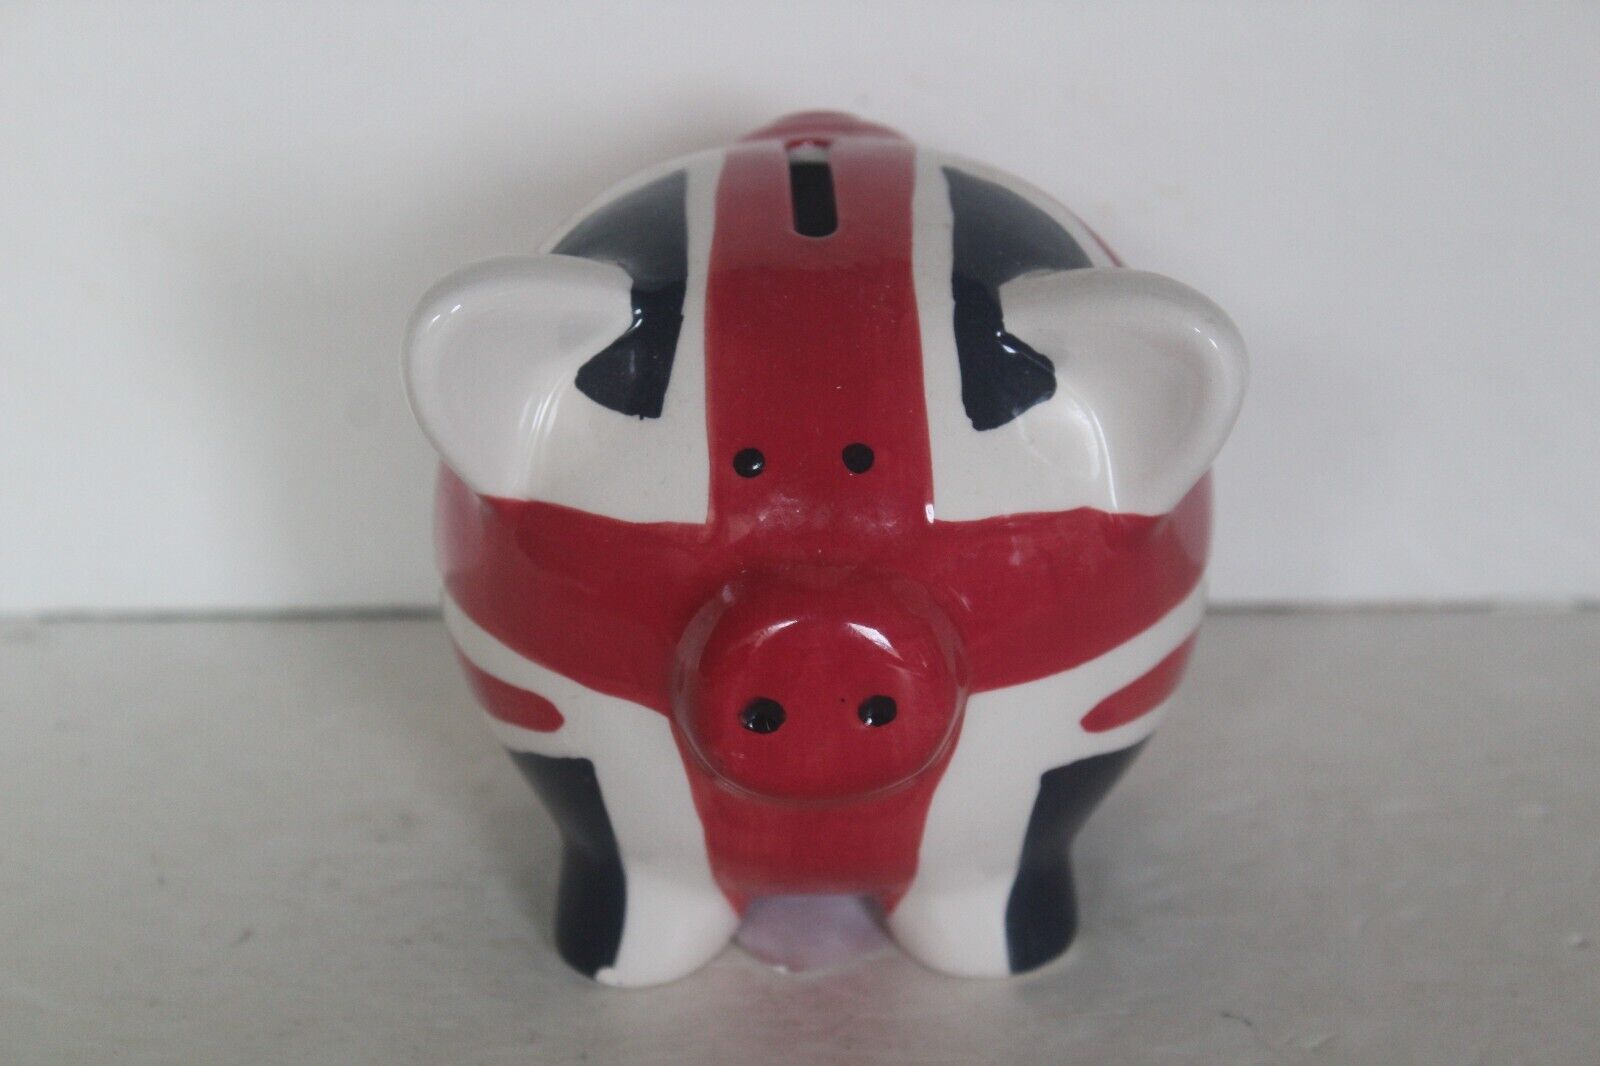 British UK Union Jack Glossy Blue Red and White Ceramic Piggy Bank Sifcon